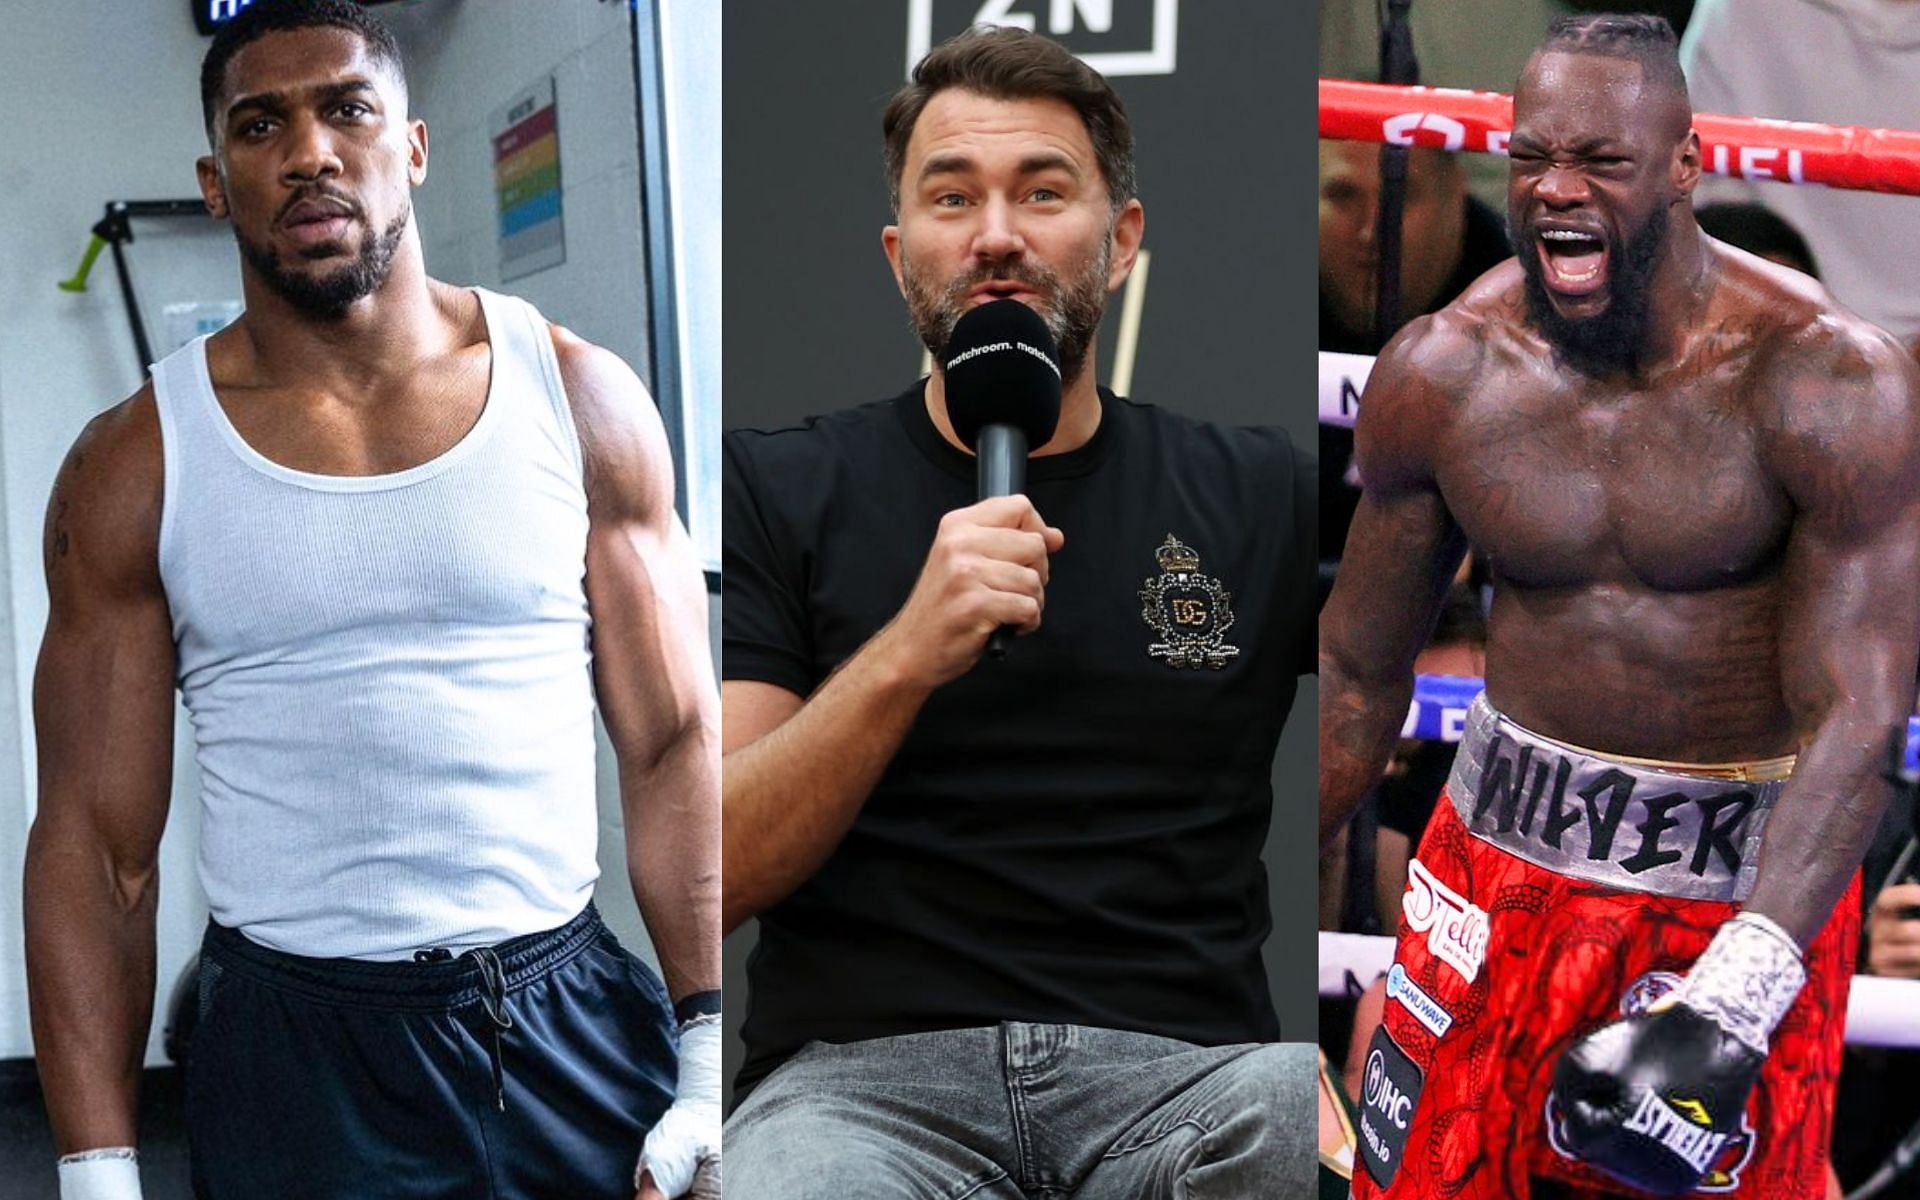 Anthony Joshua (left), Eddie Hearn (middle) and Deontay Wilder (right) [Images Courtesy: @GettyImages and @anthonyjoshua on Instagram]